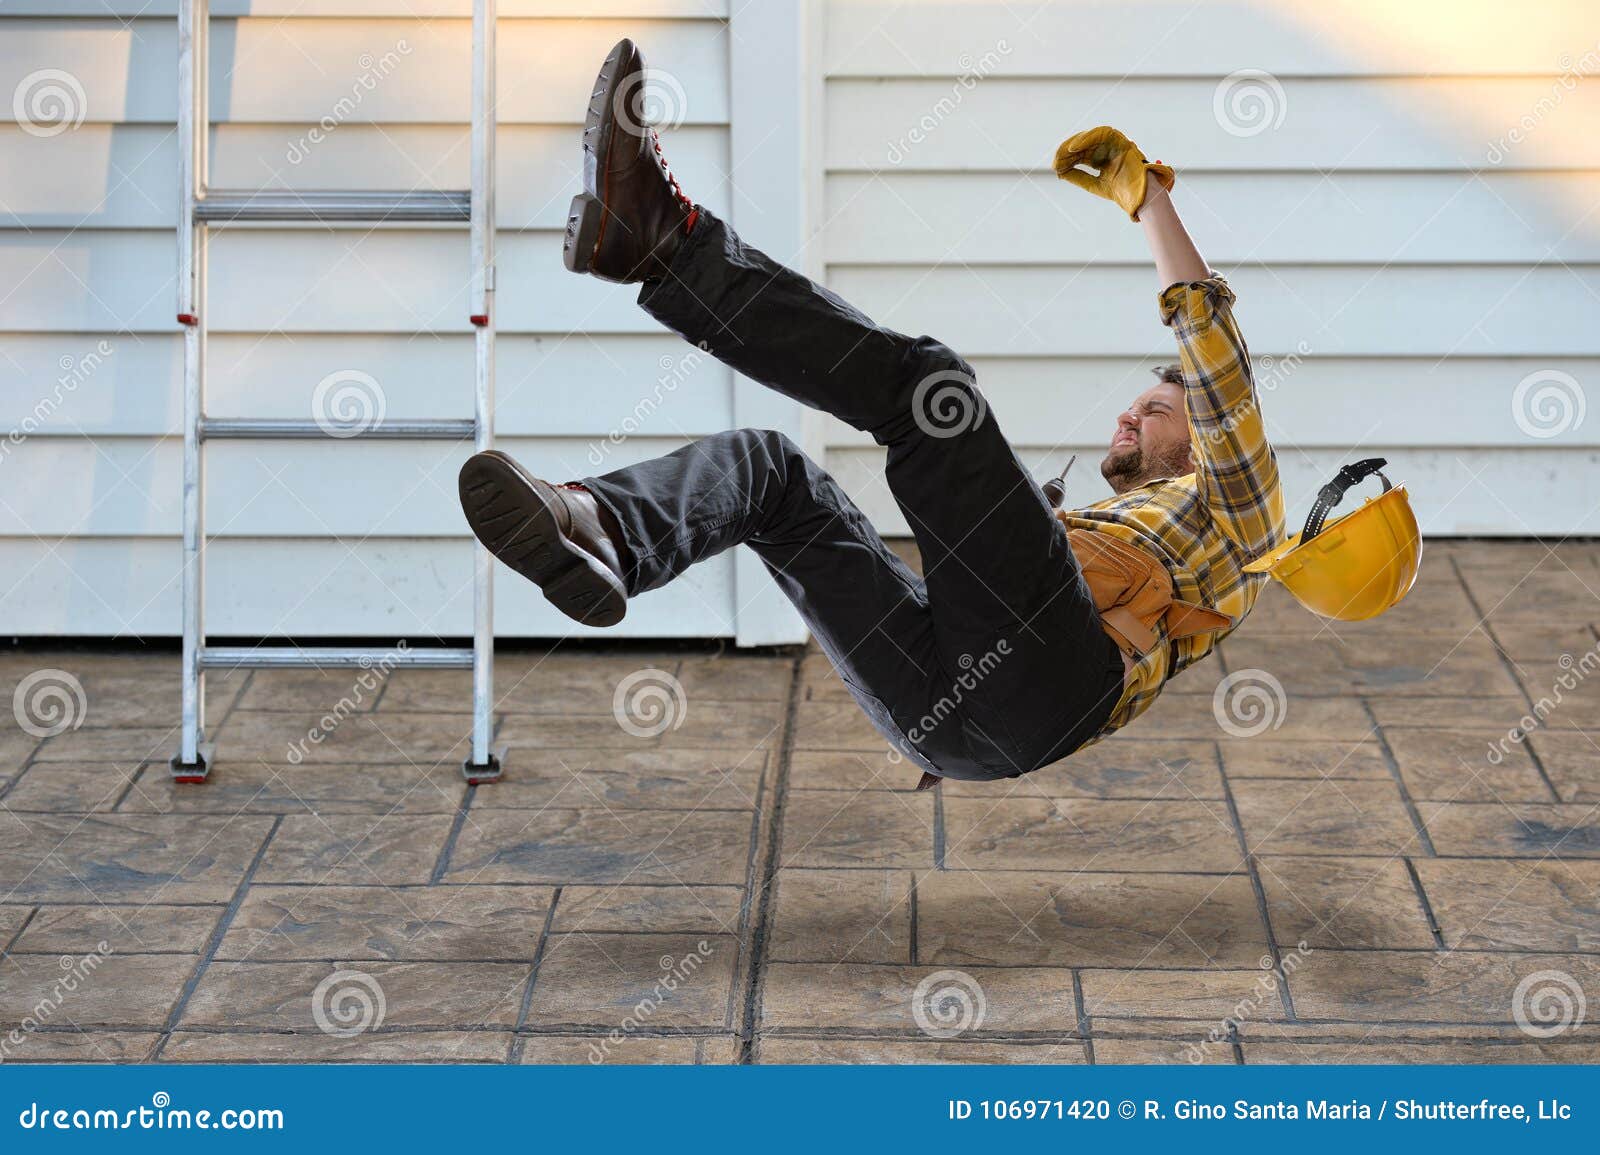 worker falling from ladder